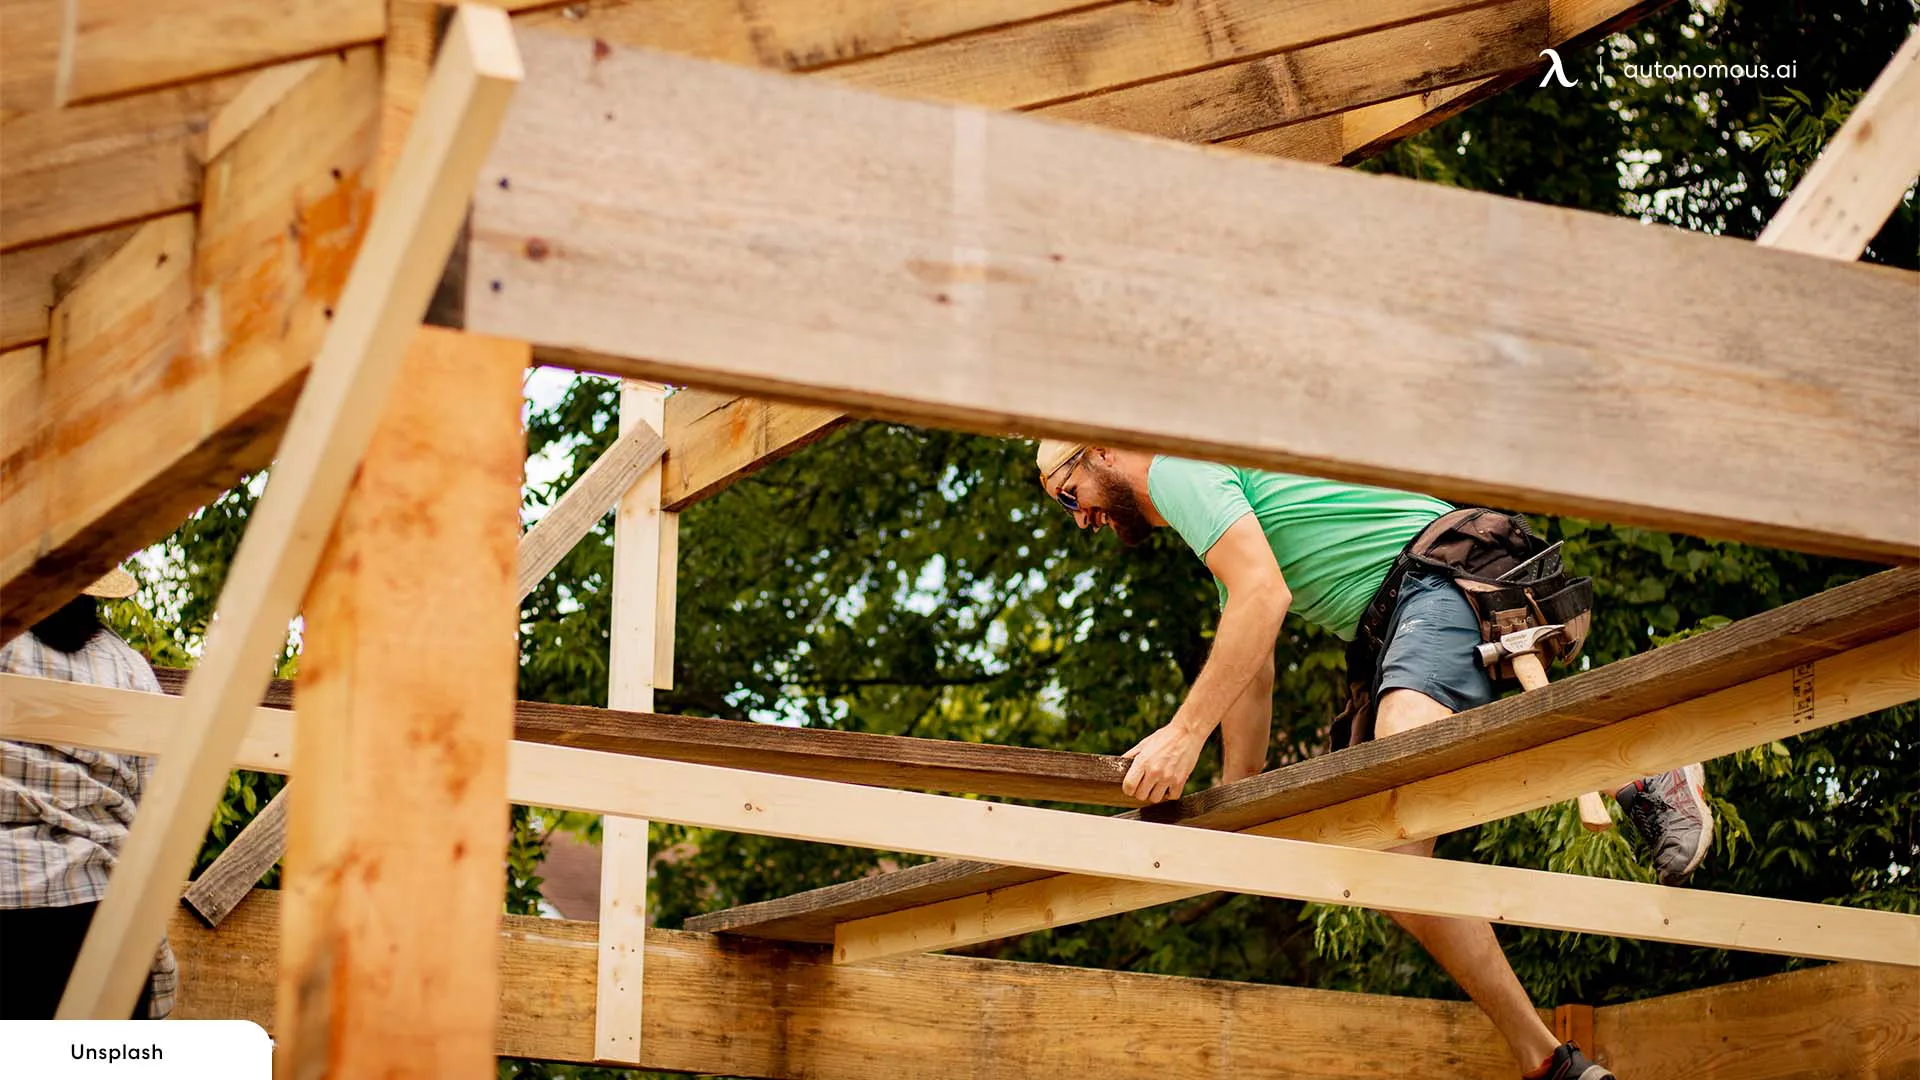 Install A Roof in DIY tiny house kit